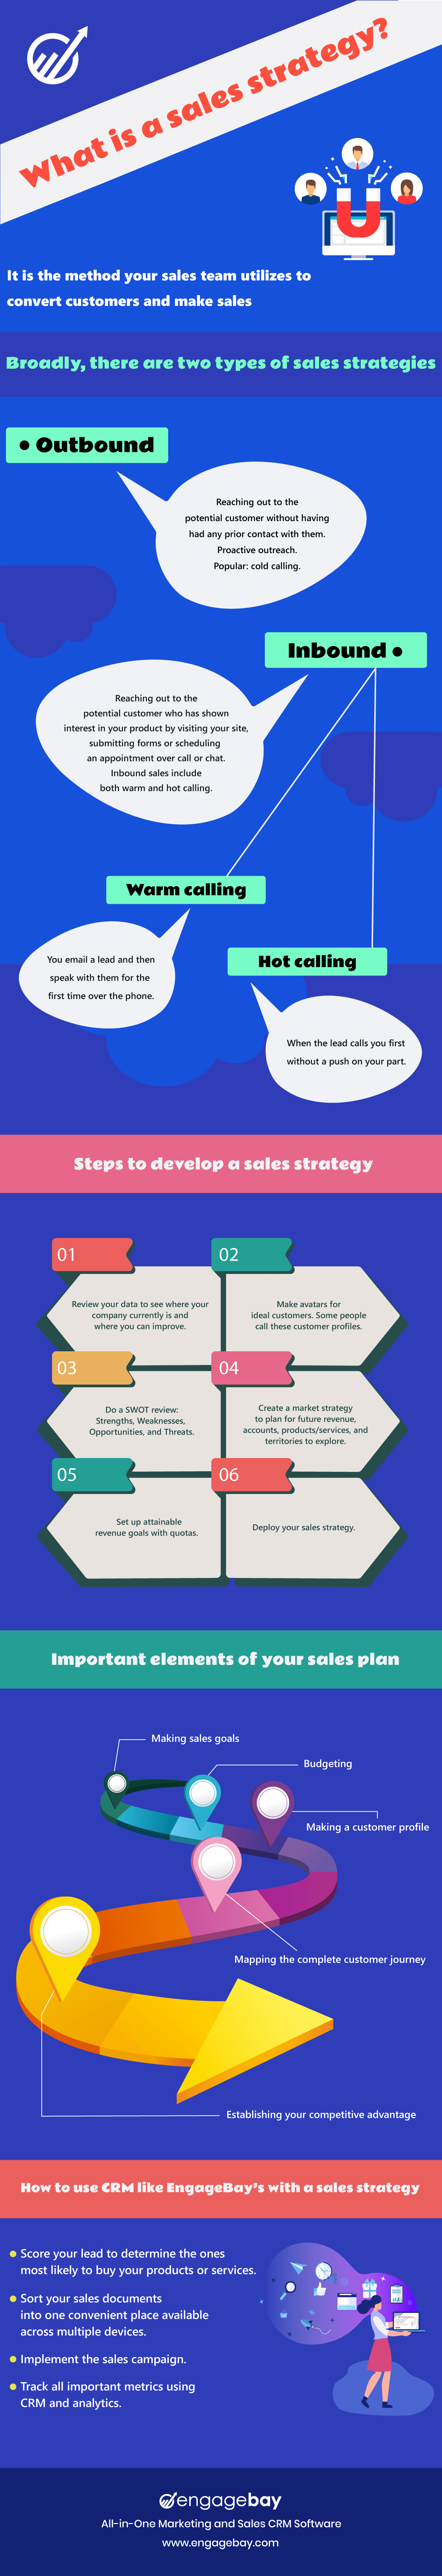 sales strategy infographic